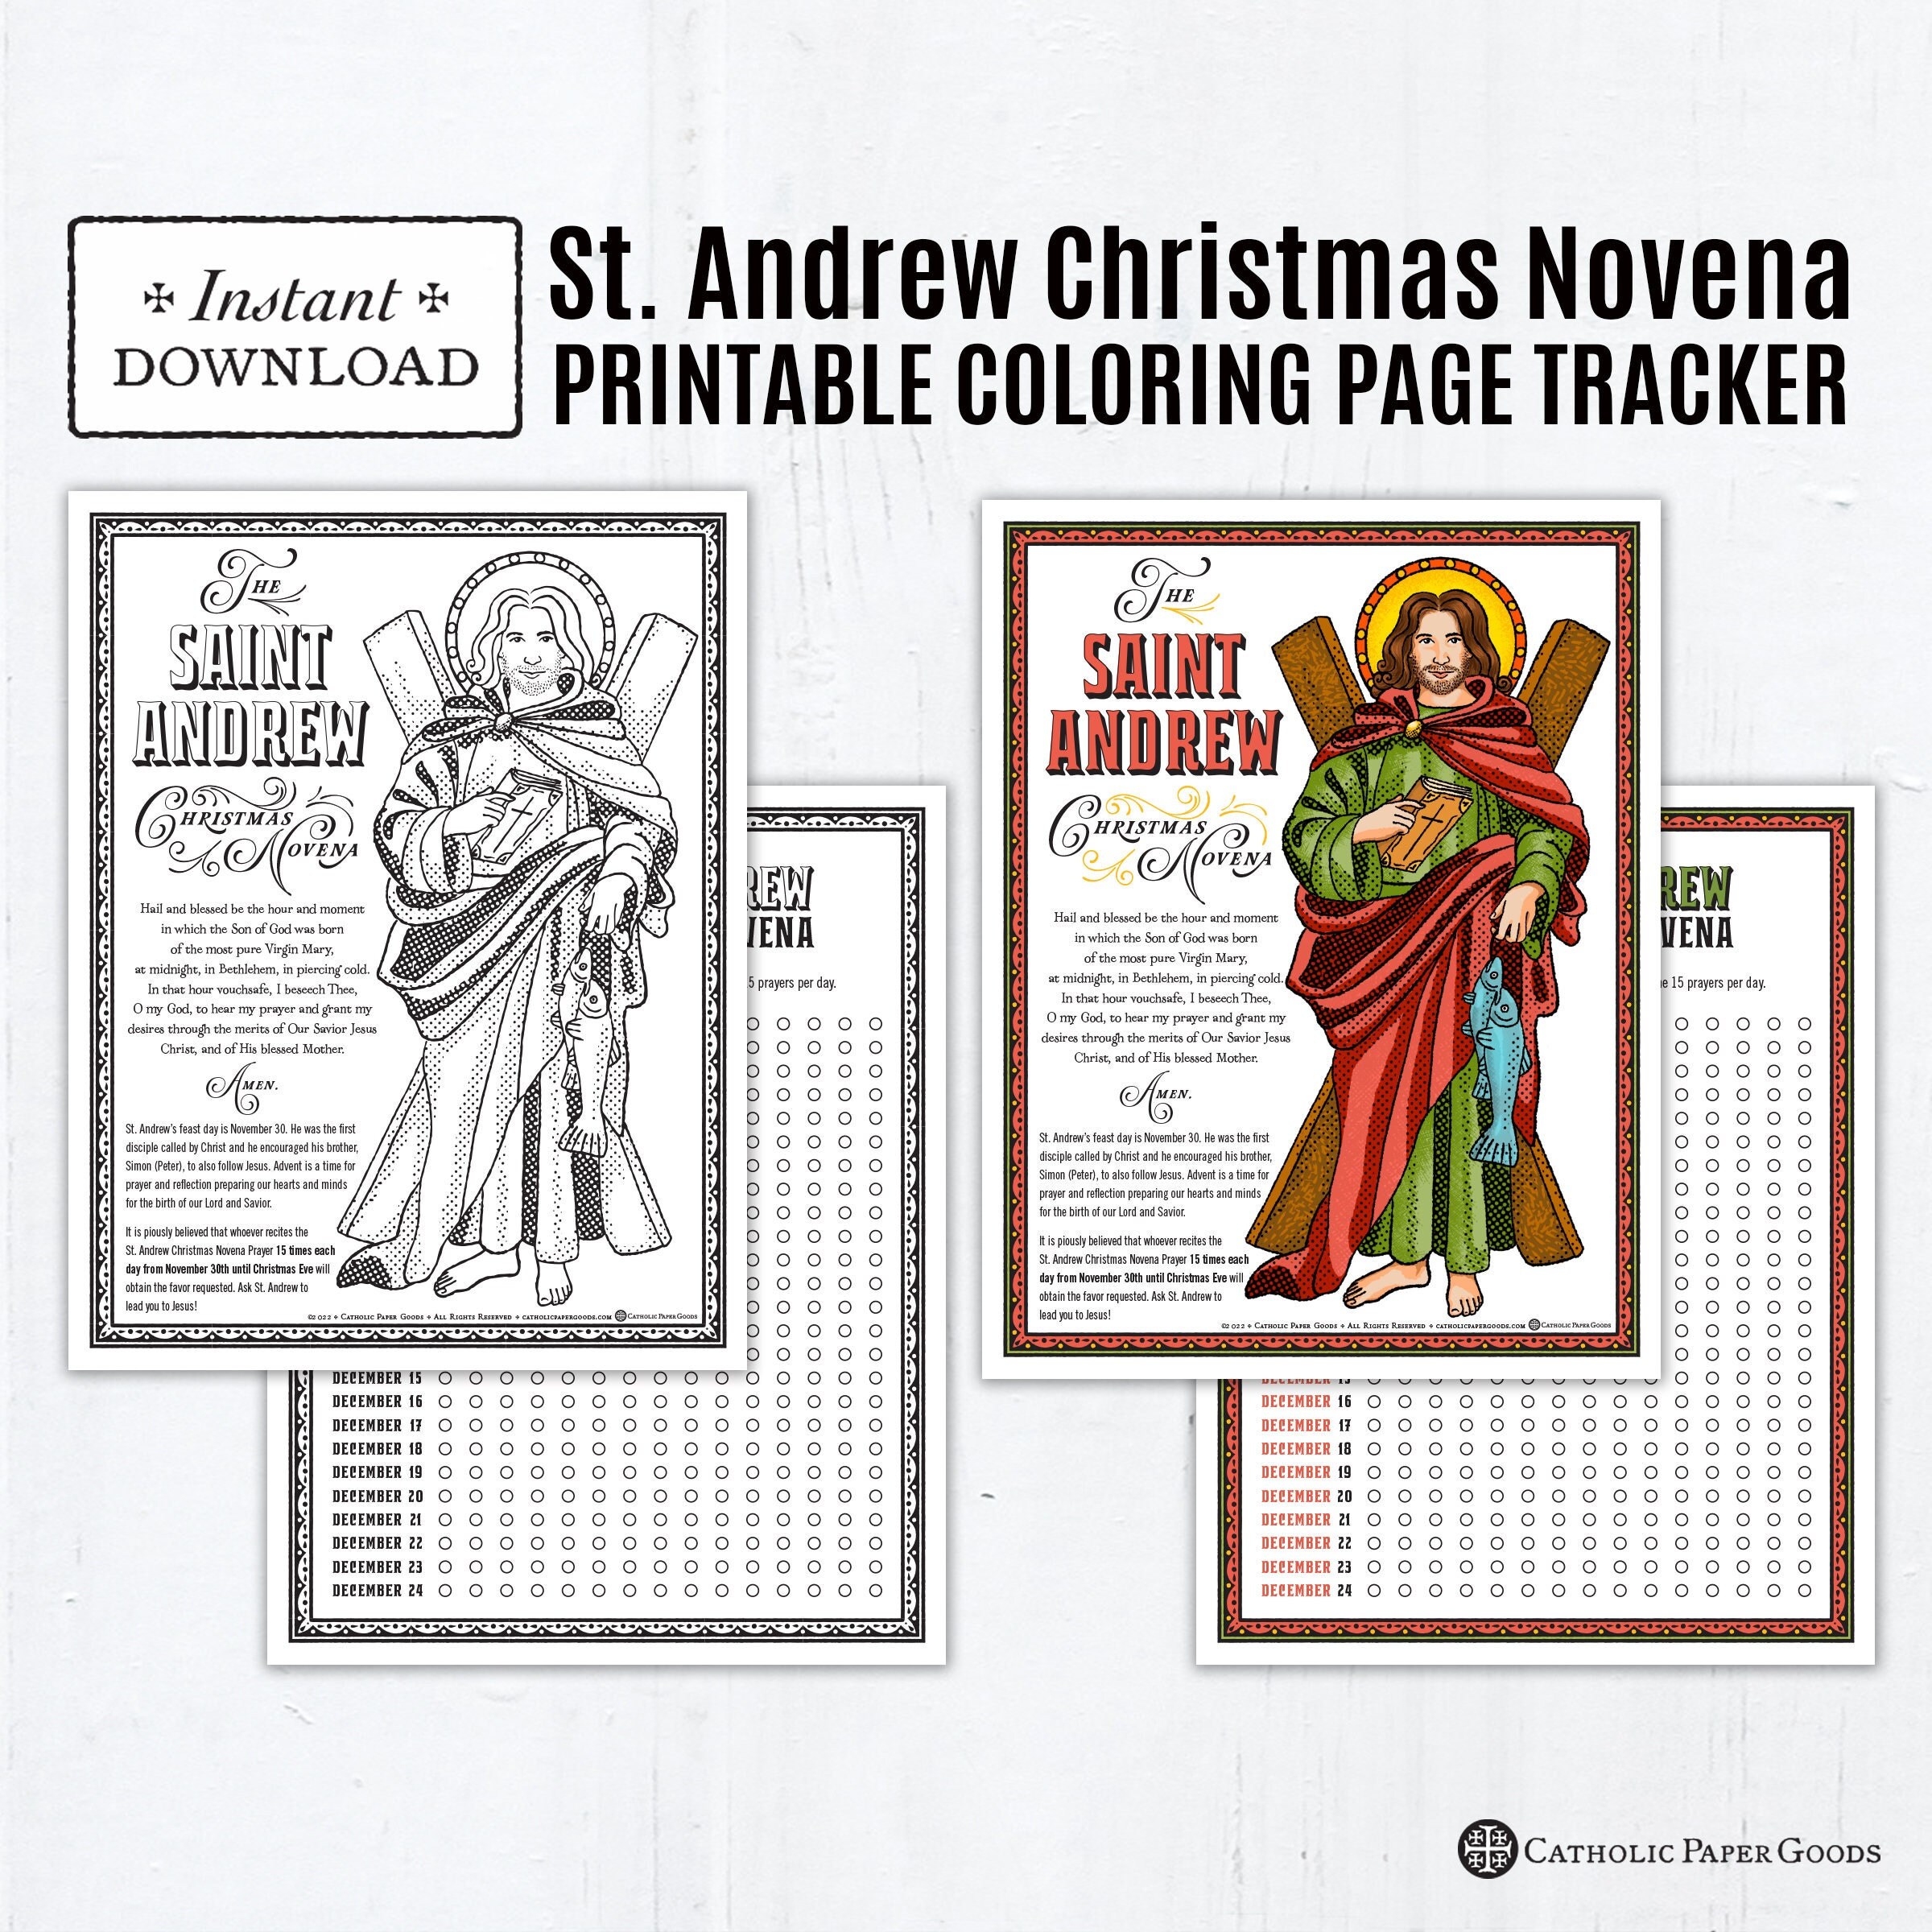 St andrew christmas novena catholic coloring page versions color black and white printable catholic advent activity digital pdf instant download